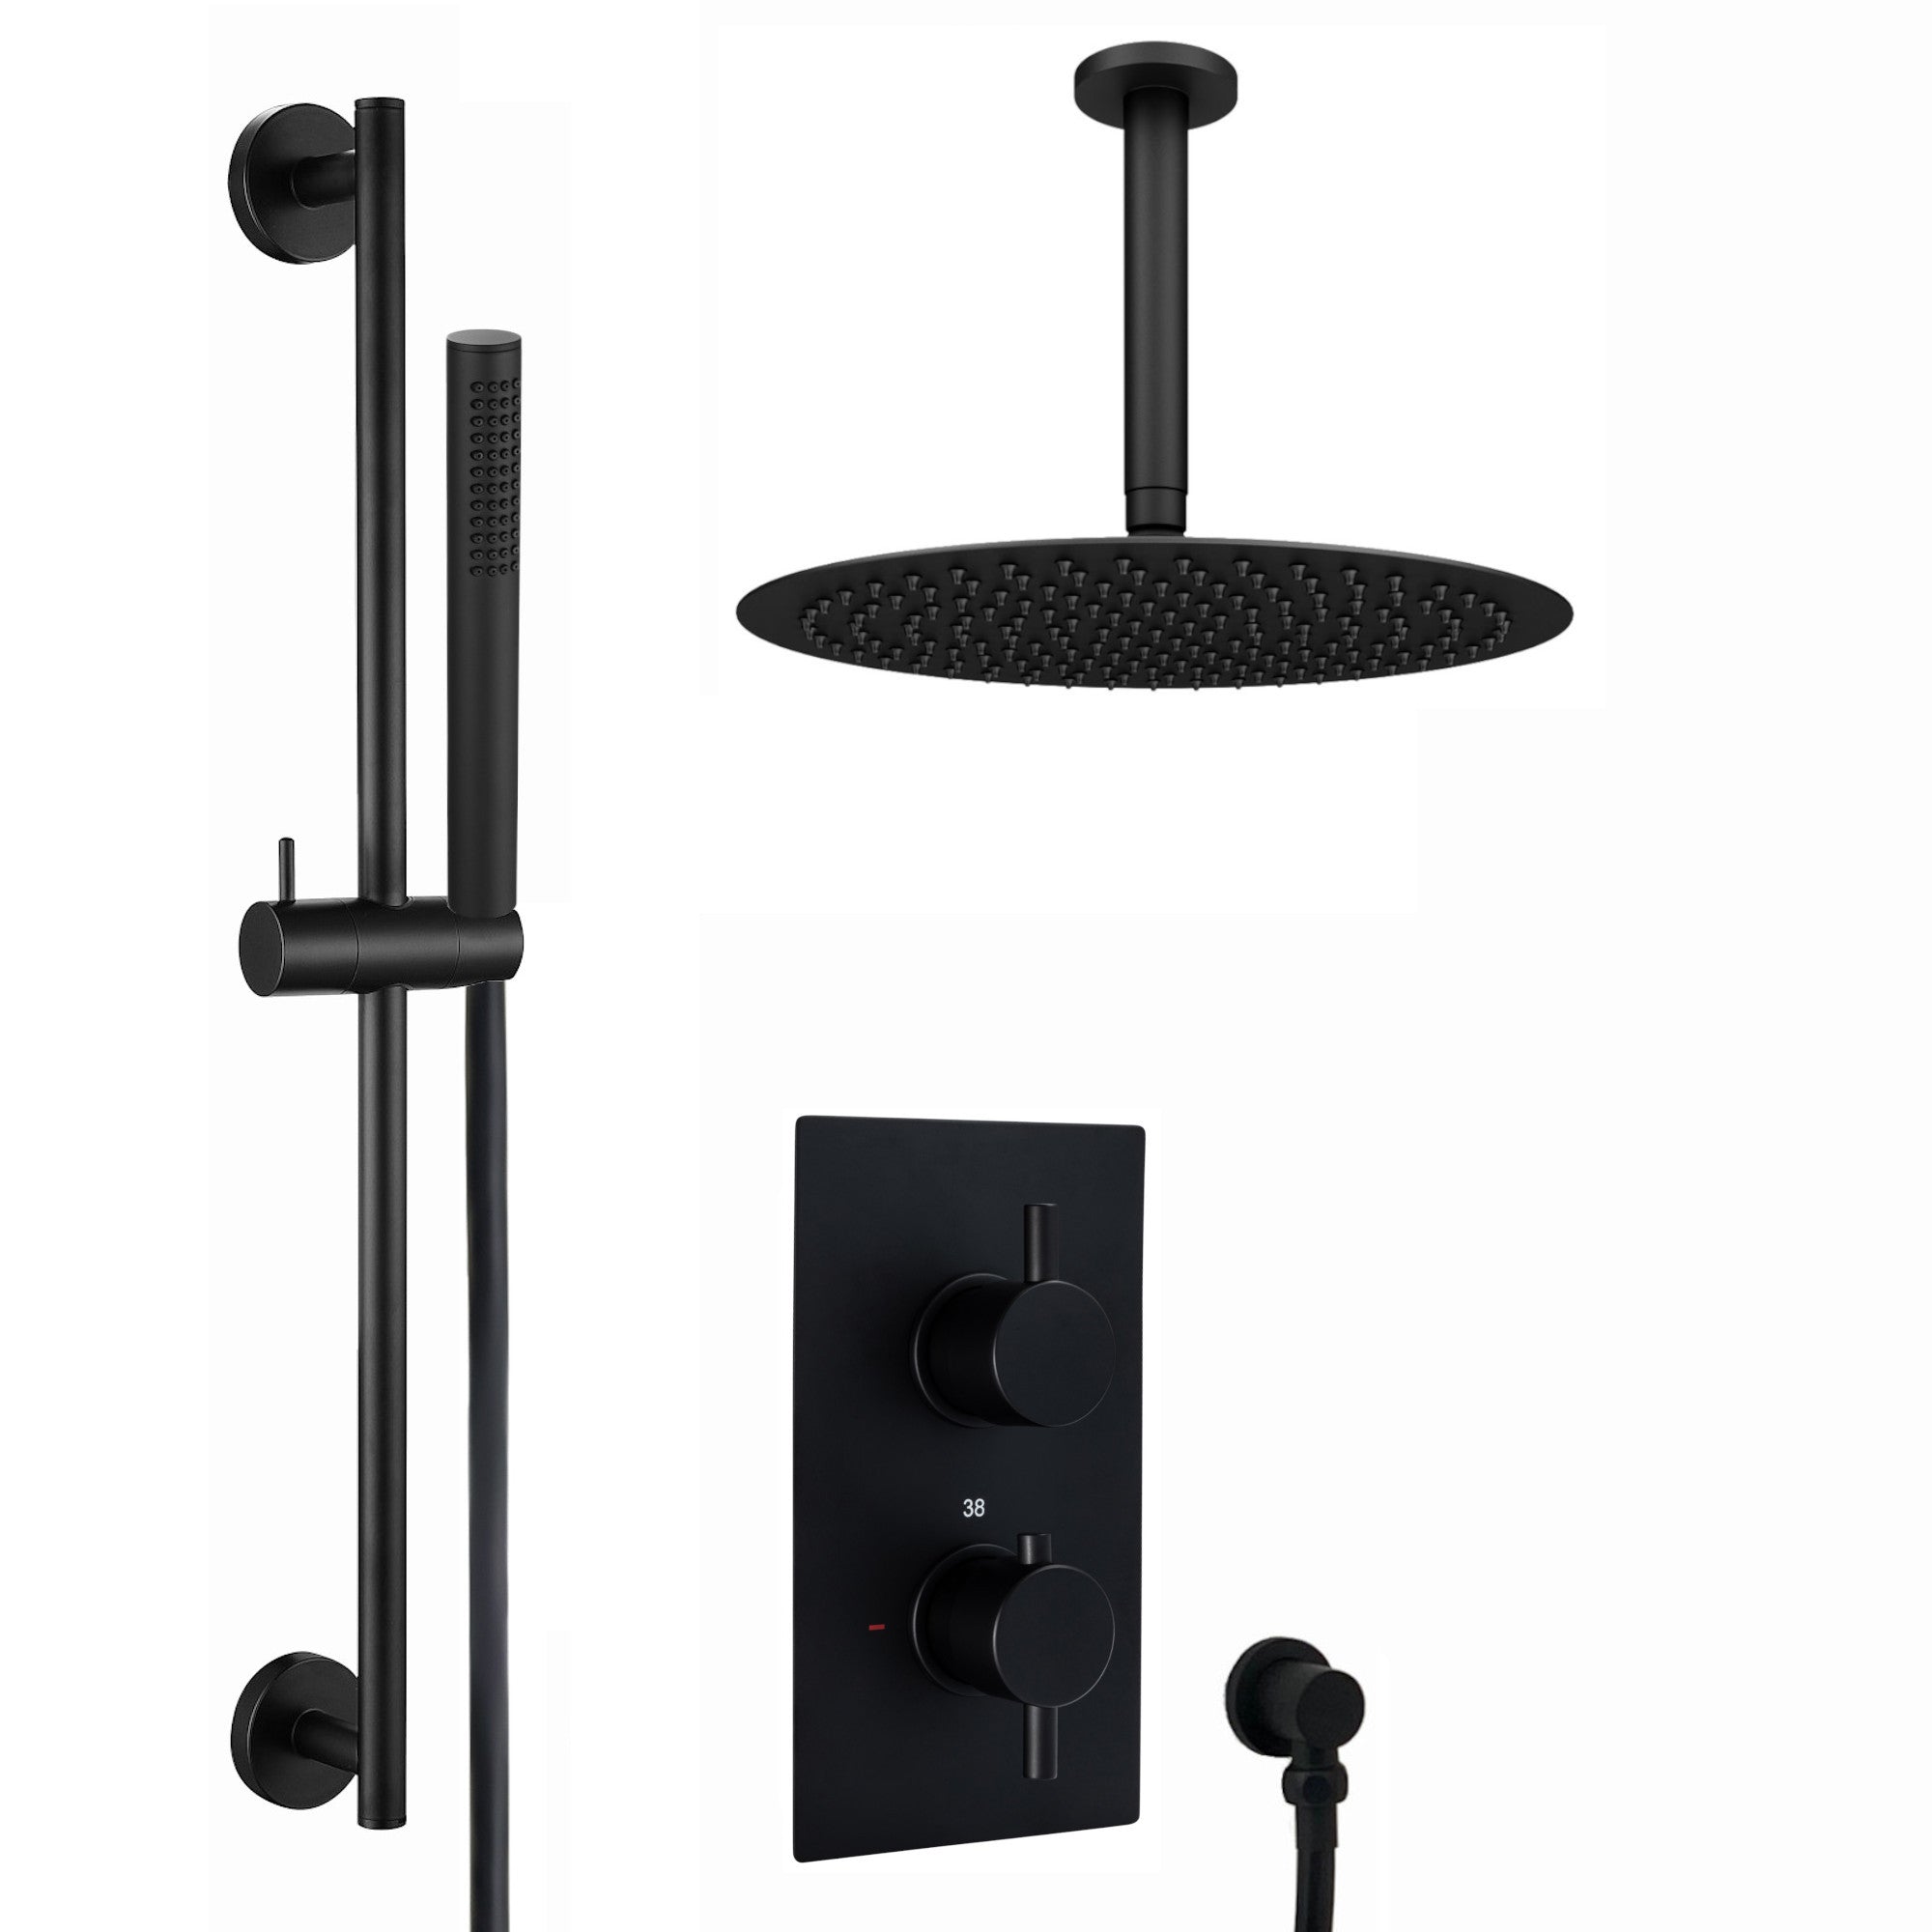 Venice Contemporary Round Concealed Thermostatic Shower Set Incl. Twin Valve, Ceiling Fixed 8" Shower Head, Slider Rail Kit - Matte Black (2 Outlet)